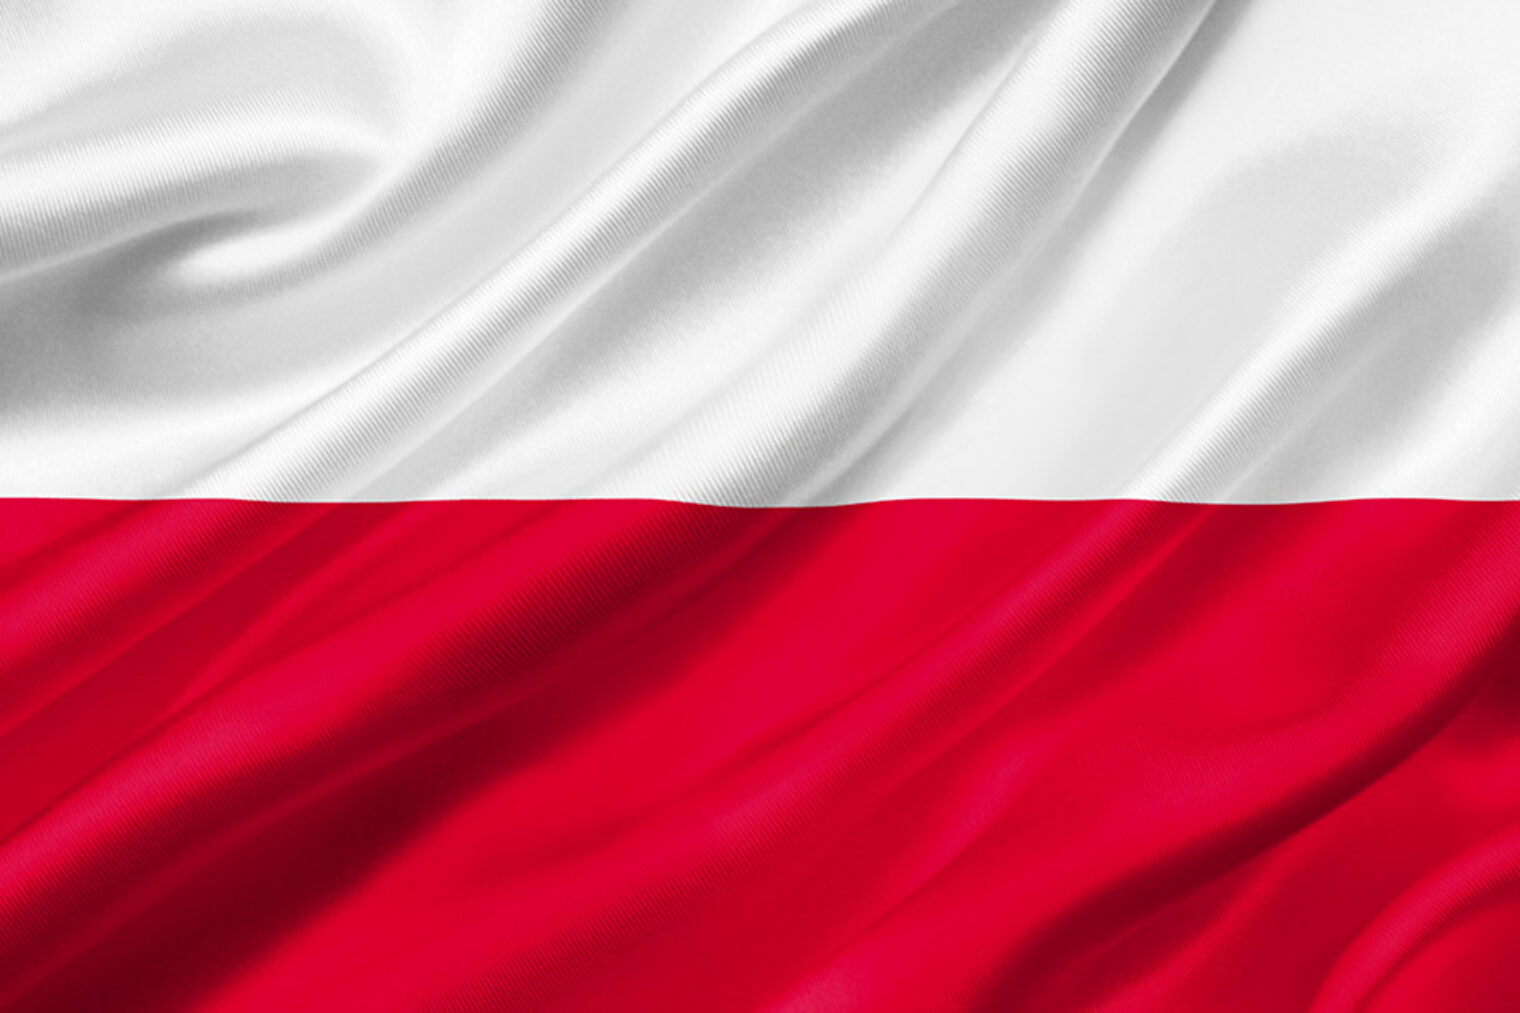 Poland flag waving with the wind, 3D illustration. Schlagwort(e): flag, background, symbol, country, independence, national, freedom, patriot, patriotic, day, white, illustration, nation, red, closeup, symbolic, isolated, glory, icon, grunge, textile, patriotism, wind, color, banner, wave, texture, waving, sign, shiny, 3d, curve, fabric, colour, isolated on white, text area, shadow, country flags, country name, country sign, waving flag, poland, republic of poland, rzeczpospolita polska, warsaw, polish, pole, strips, 3D rendering, 3D illustration